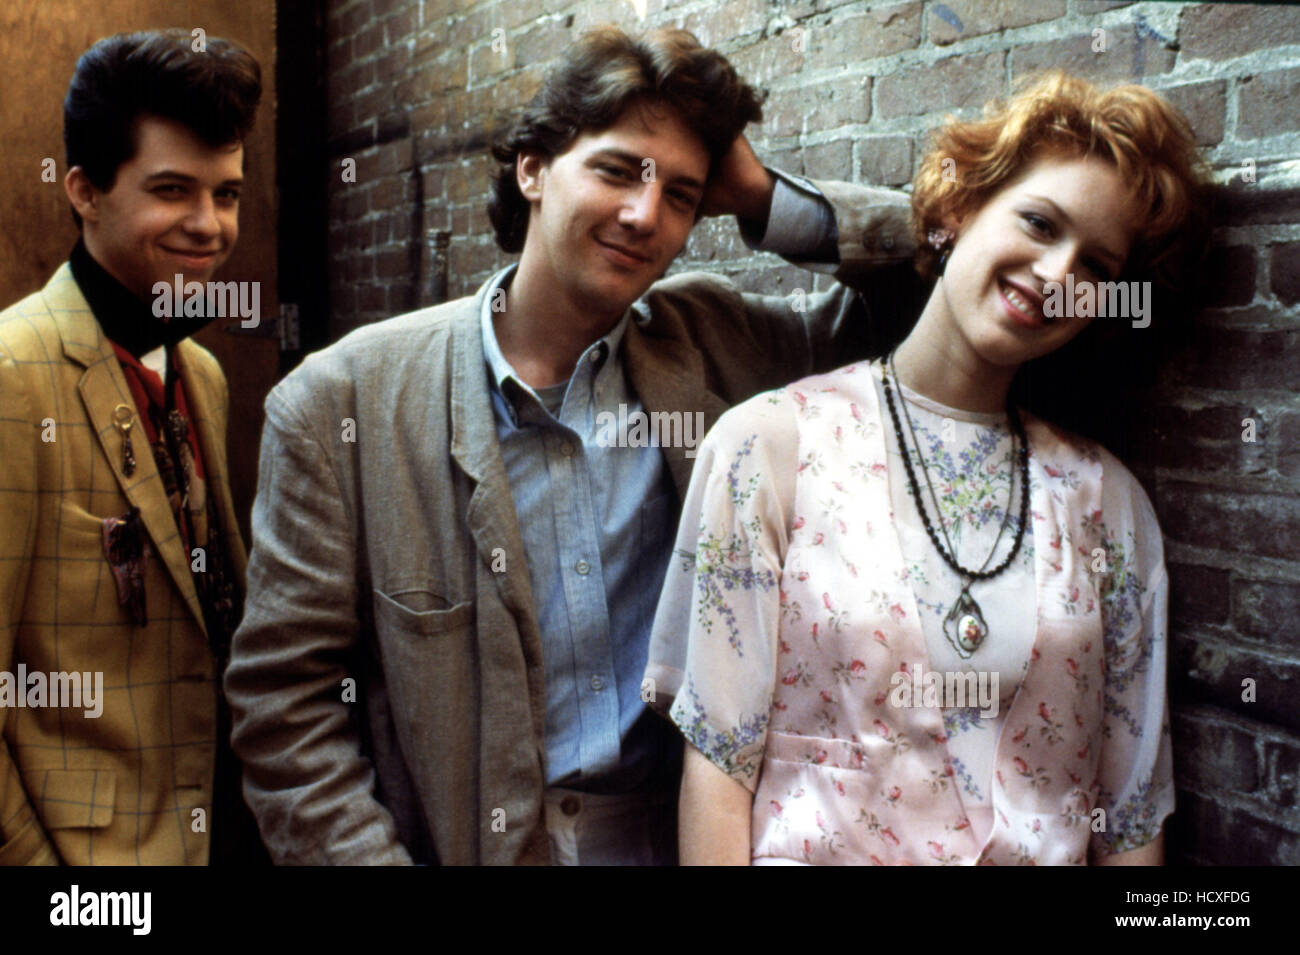 Pretty In Pink Jon Cryer Andrew Mccarthy Molly Ringwald 1986 Stock